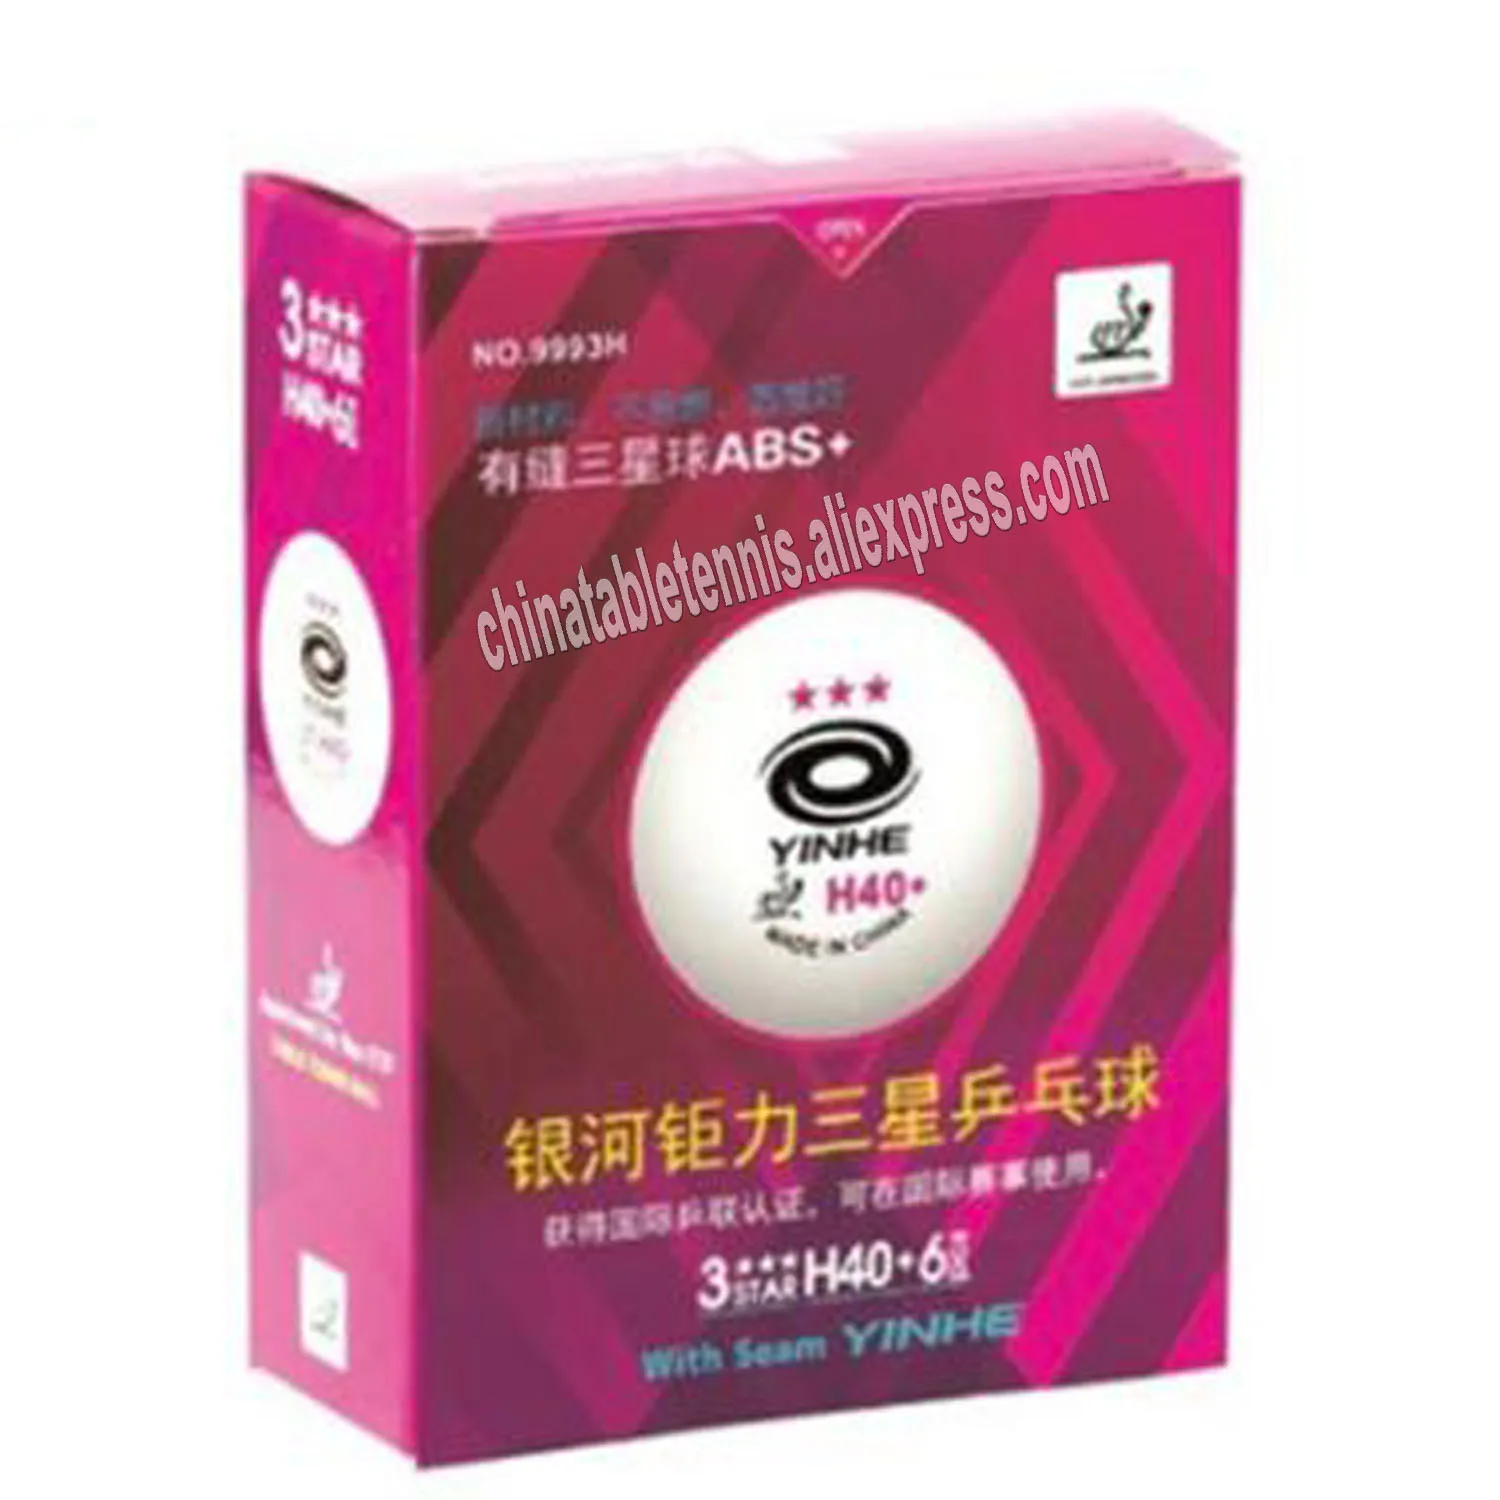 

YINHE Galaxy 3-Star Seamed Table Tennis Balls Plastic 40+ ITTF Approved White Poly Ping Pong Balls